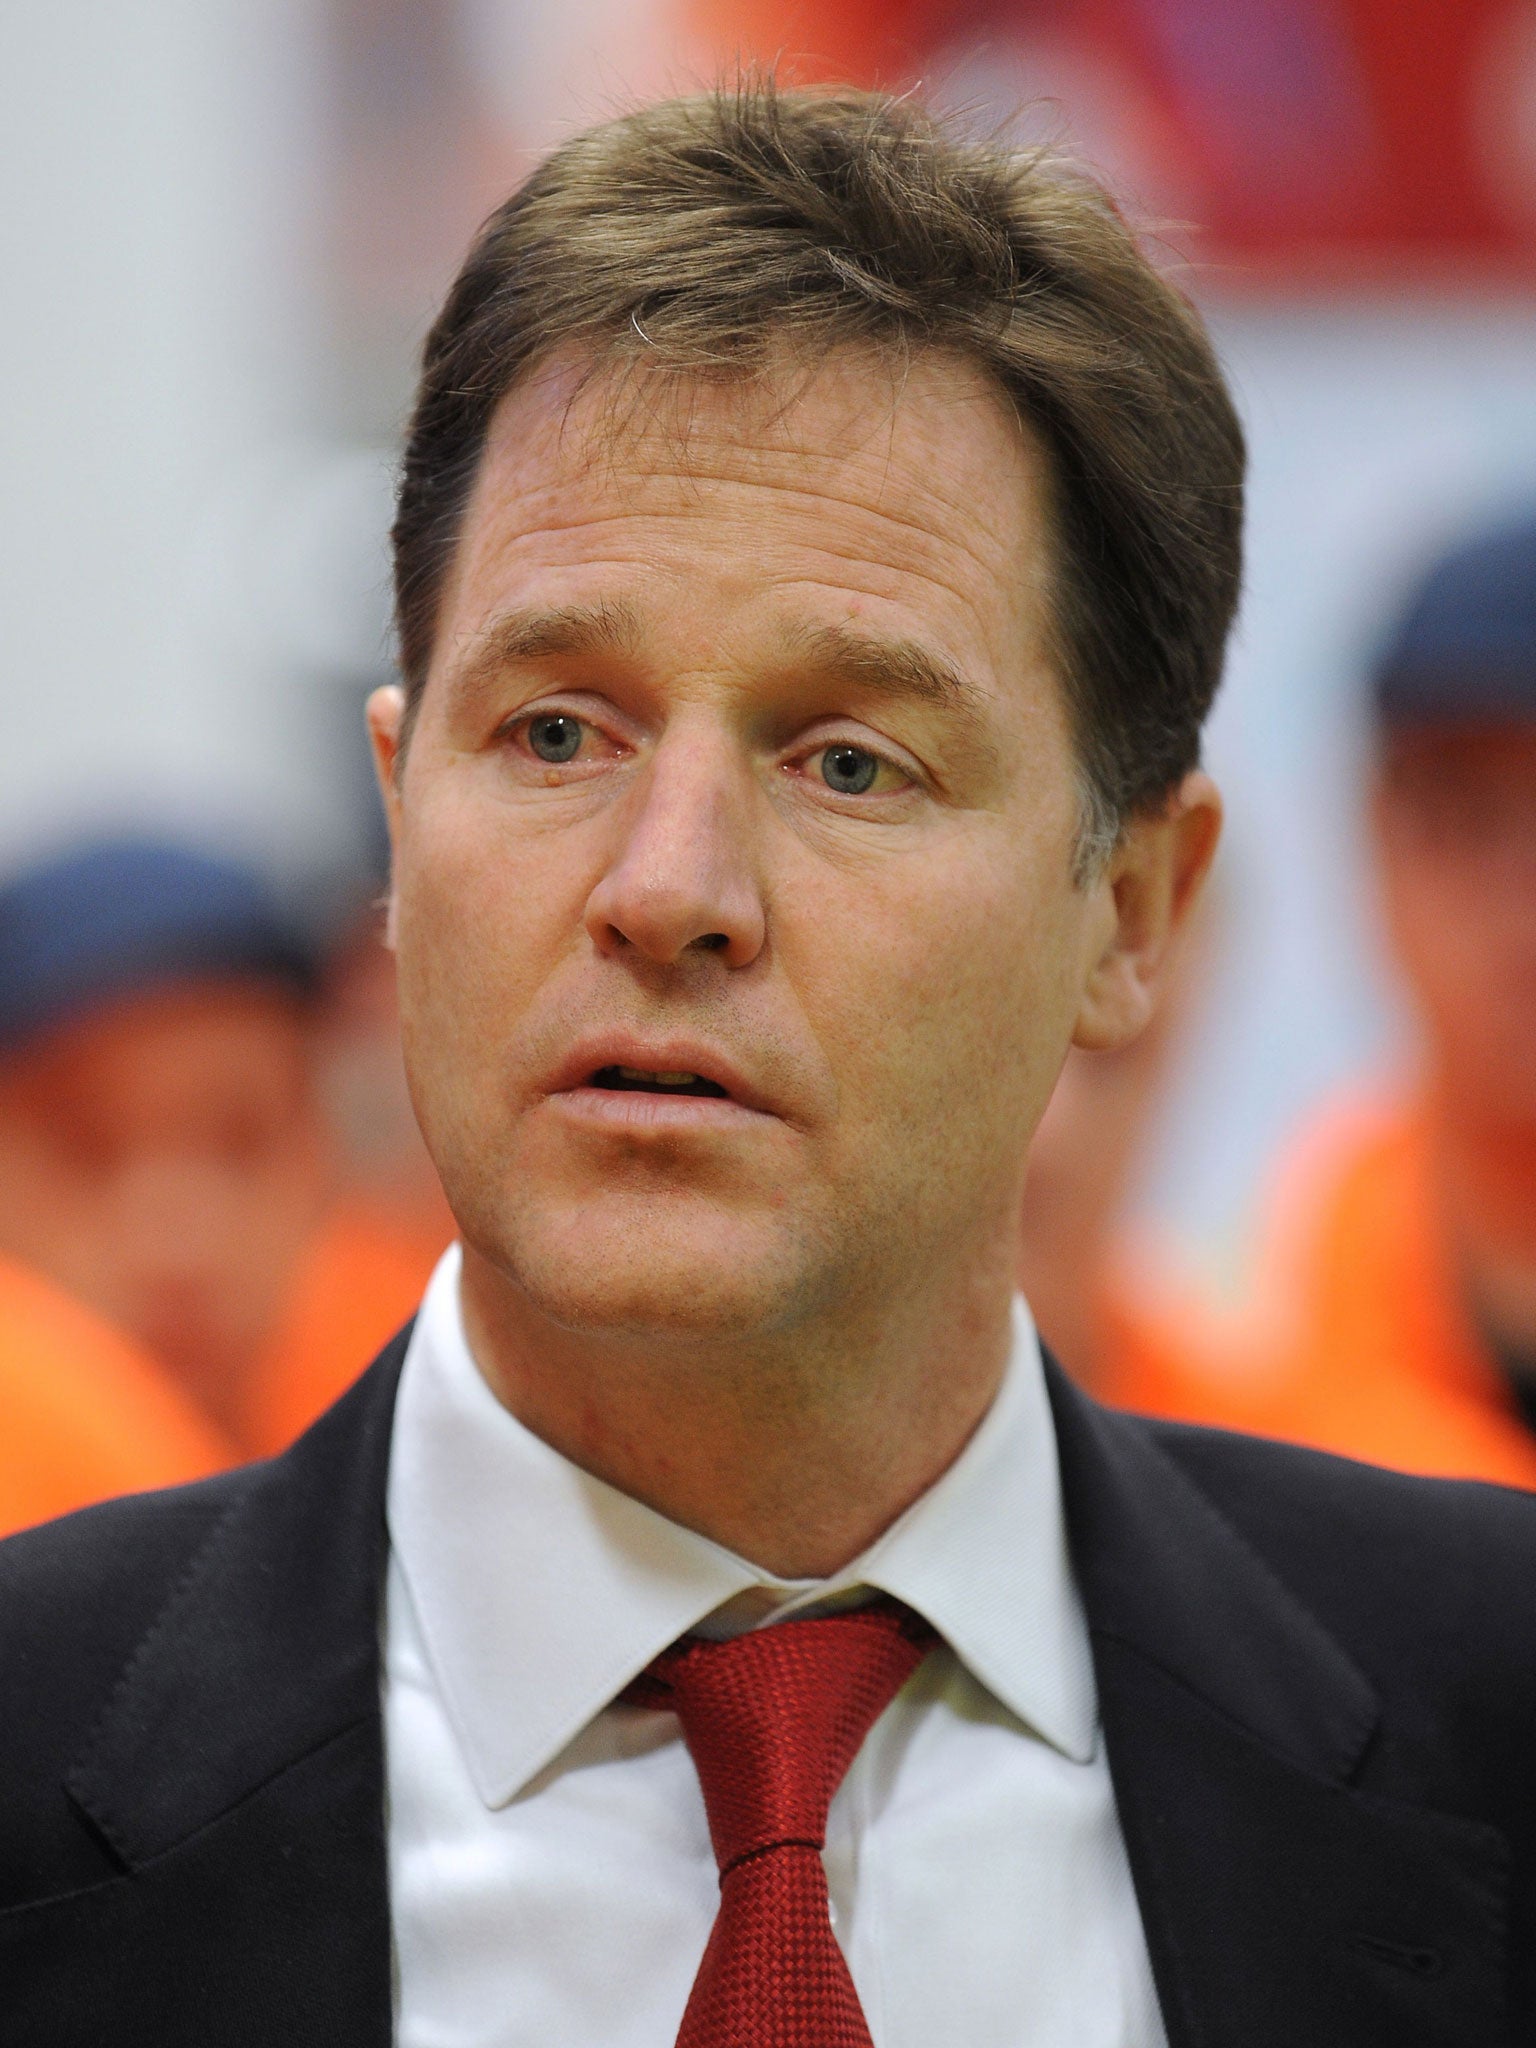 Mr Clegg says proper accountability of the intelligence services is essential to increase public confidence in them